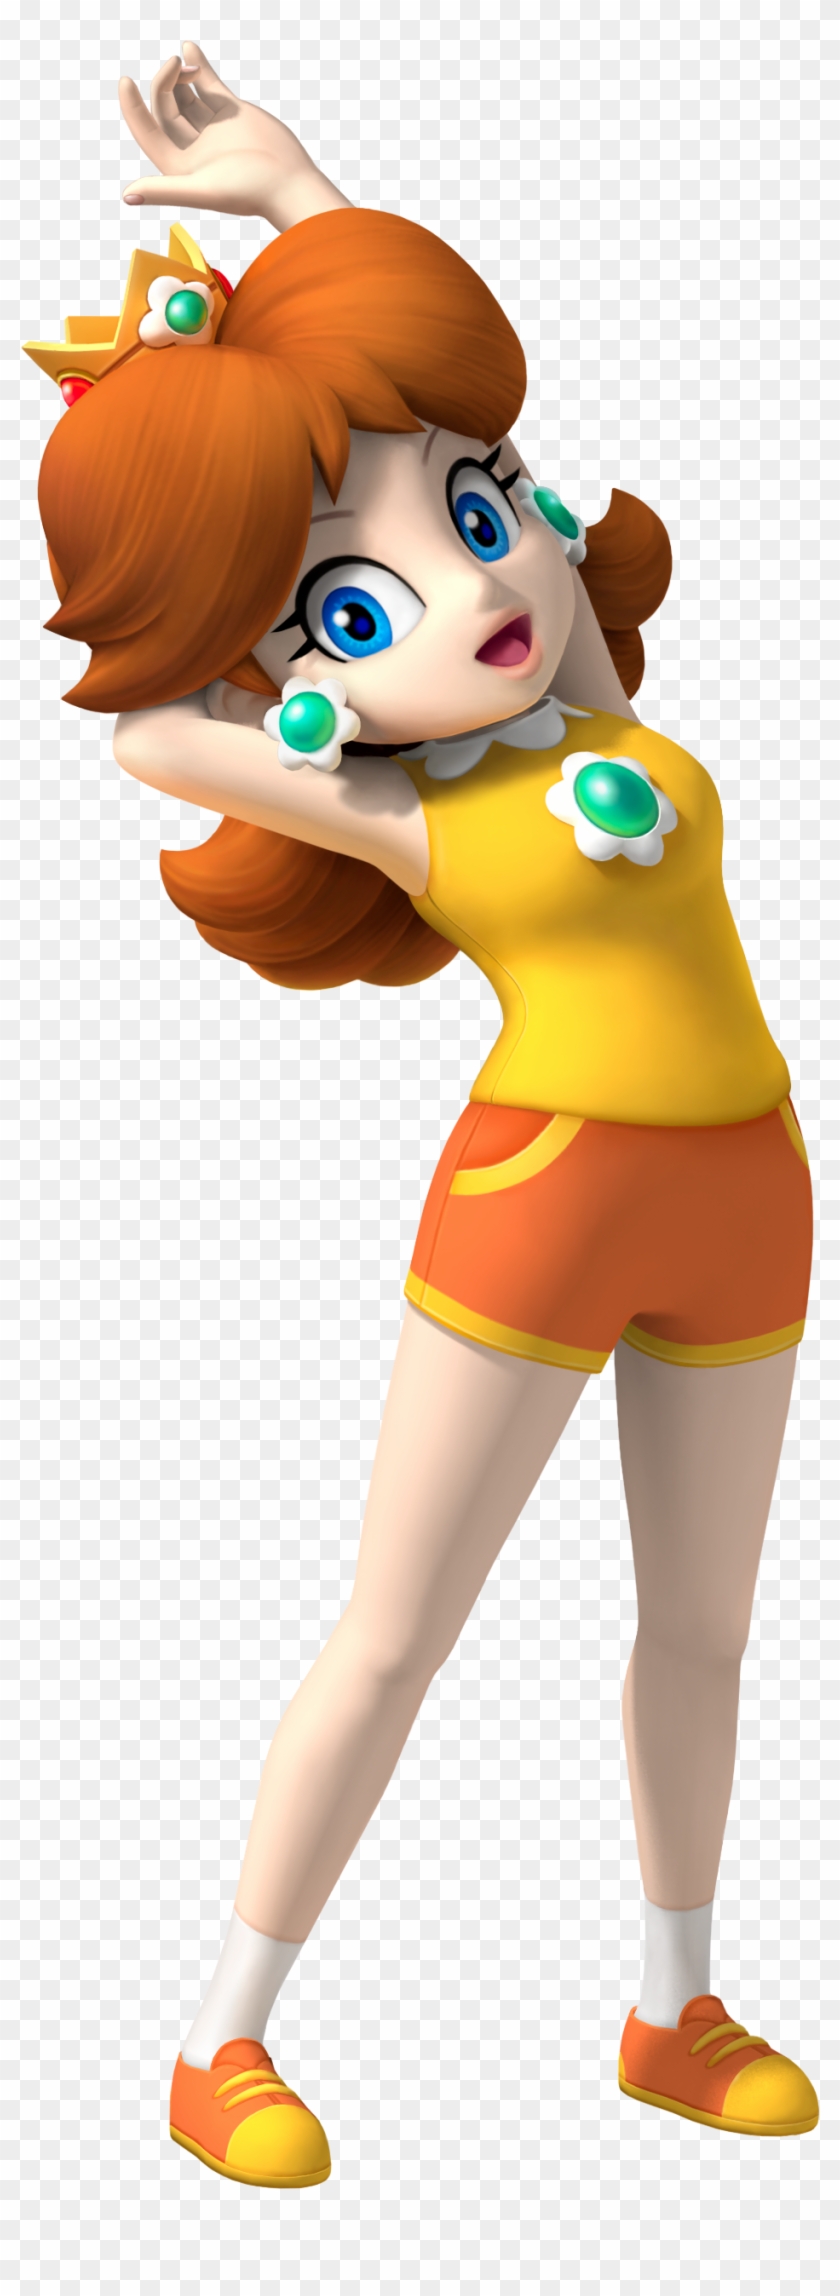 A Thorough Analysis On The Different Entities Of Daisy - Princess Daisy In Shorts Clipart